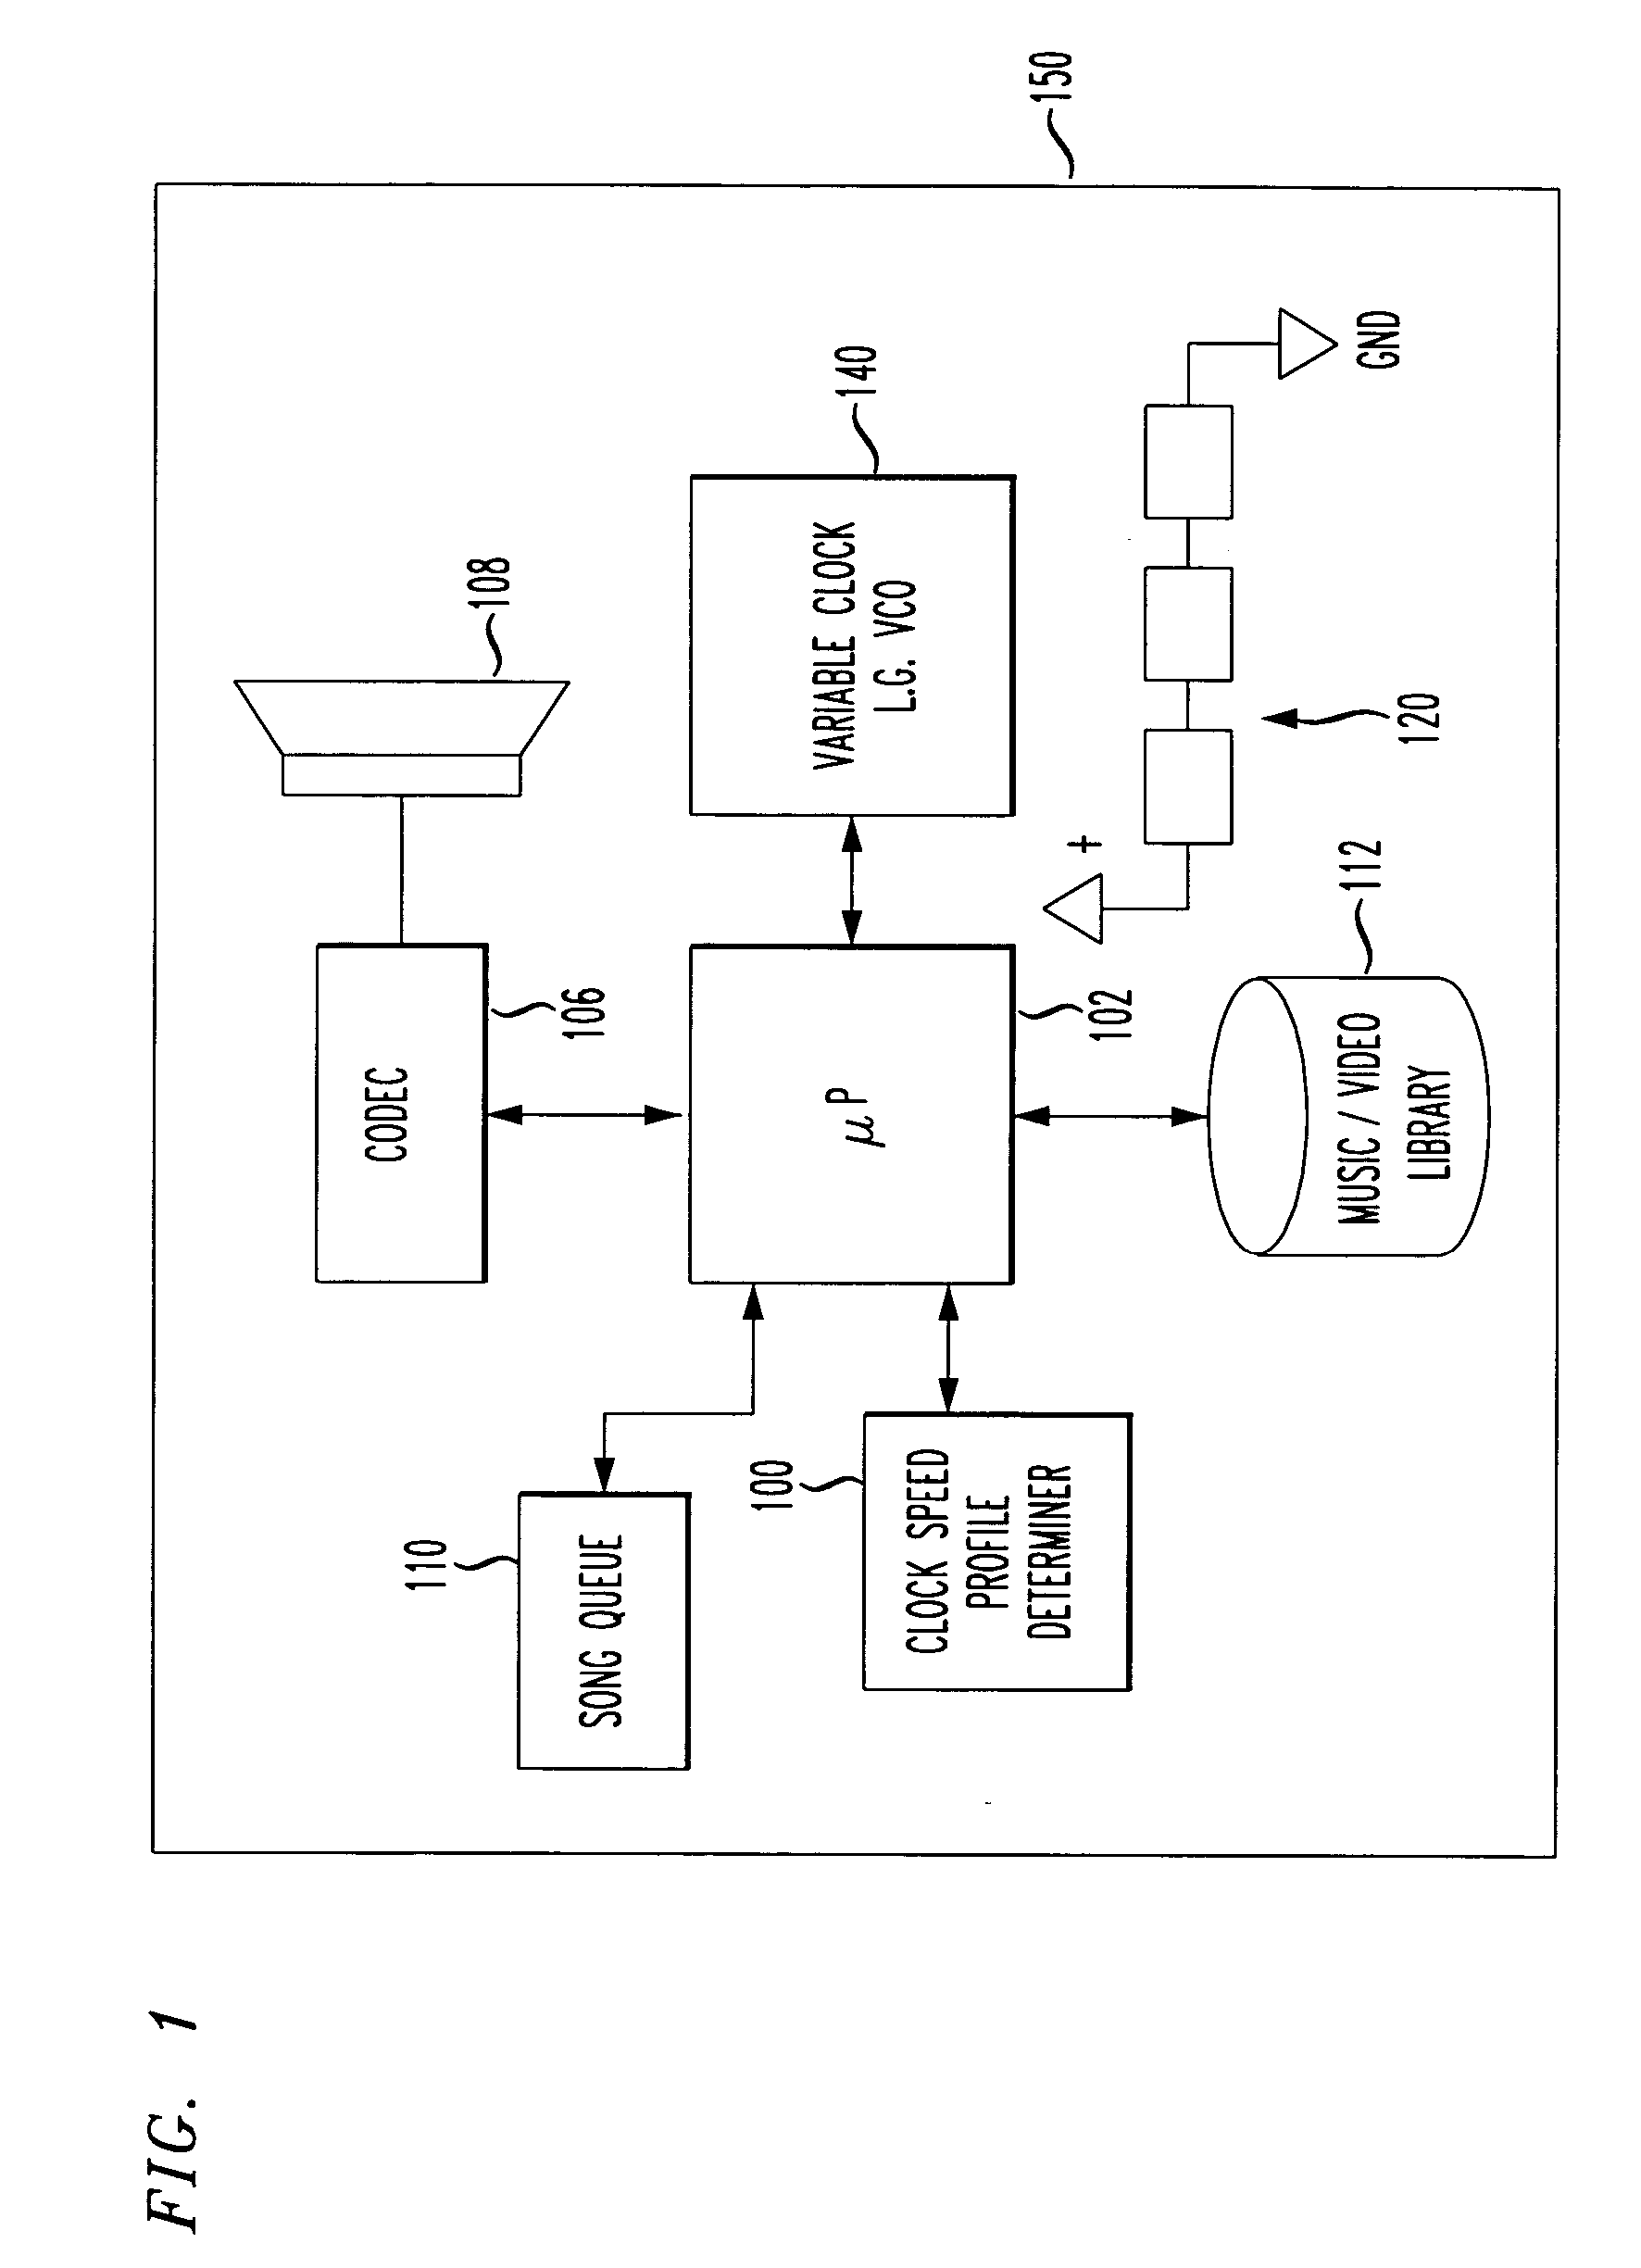 Adaptive power management in portable entertainment device